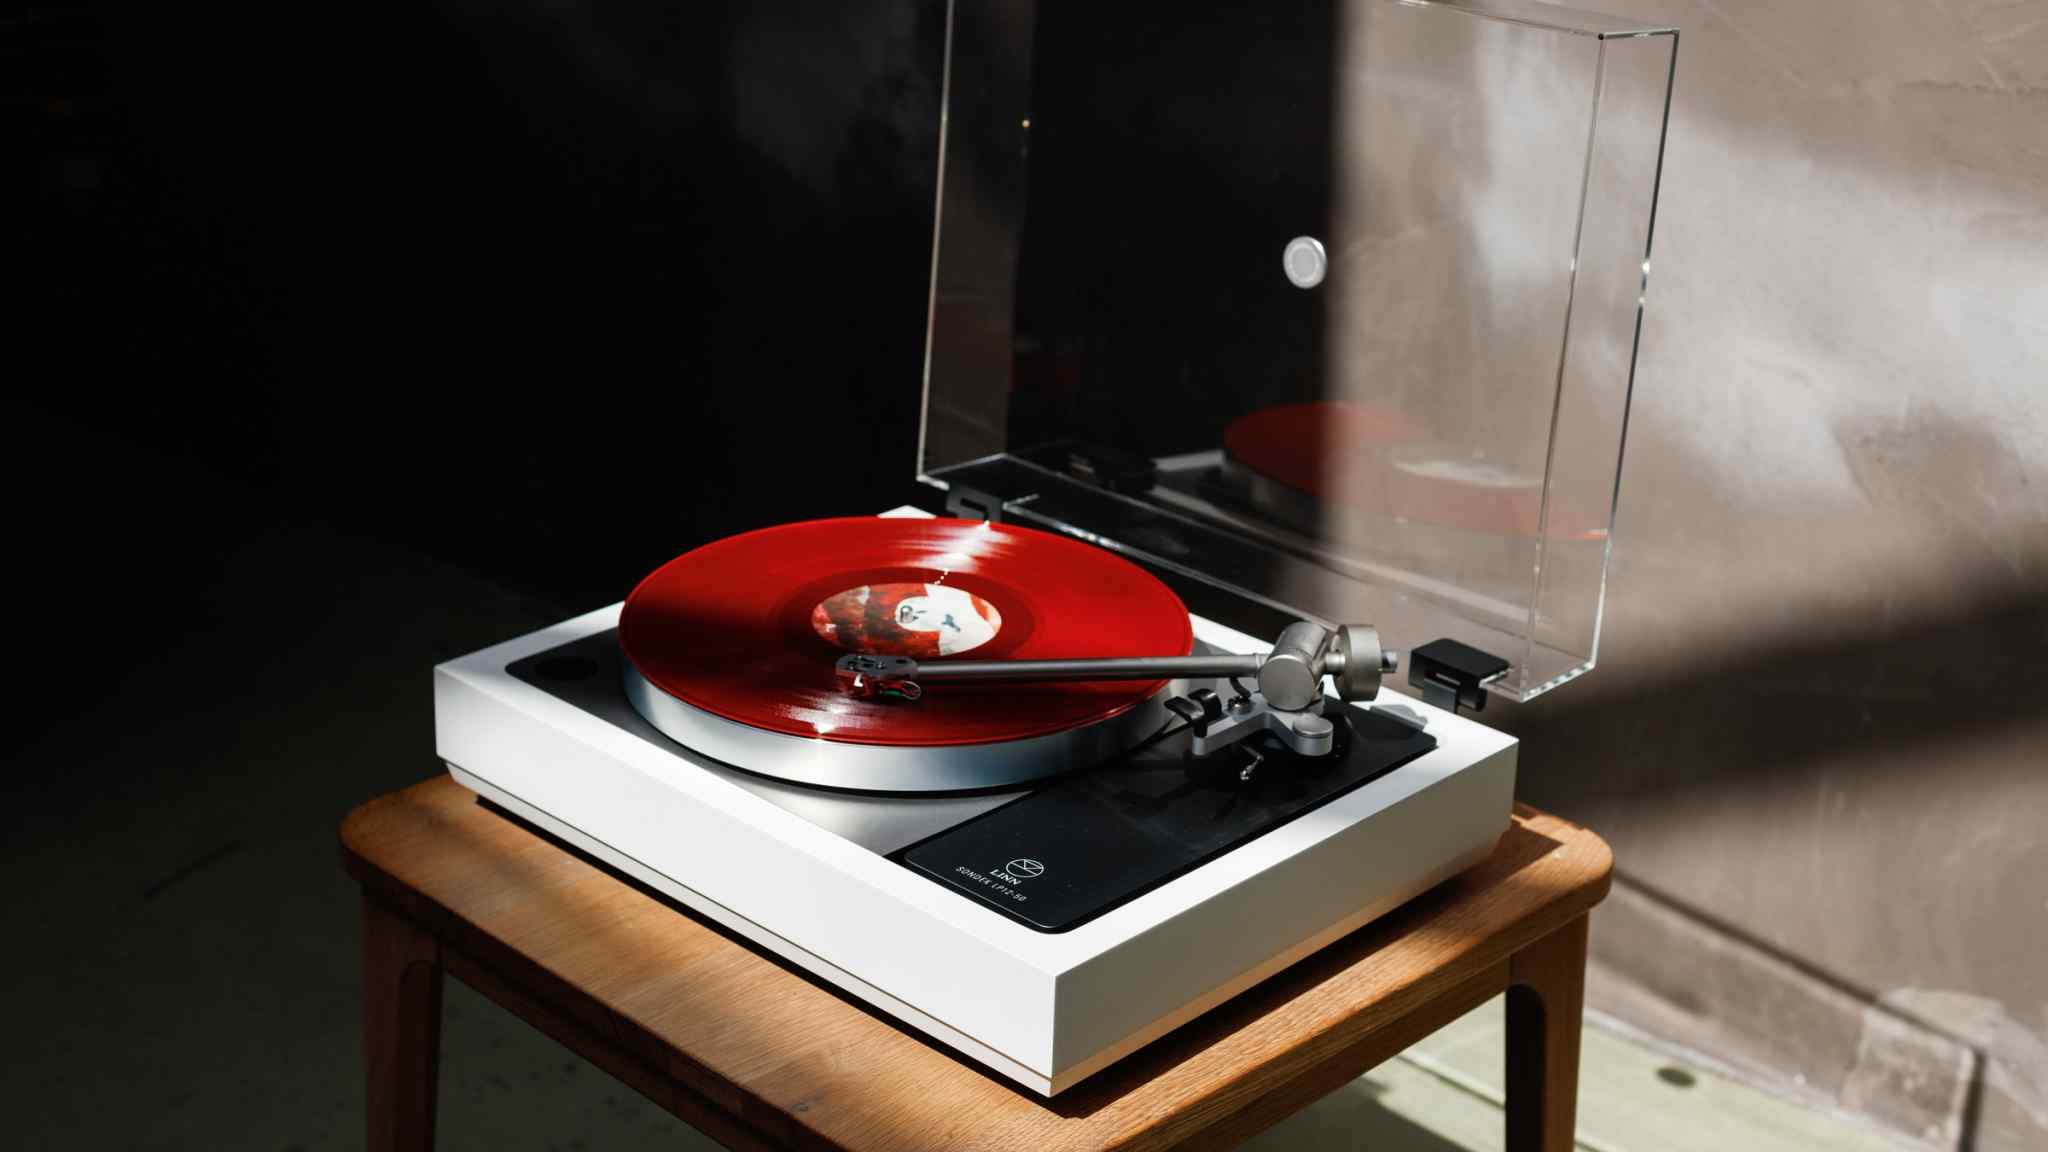 If Jony Ive made record players...